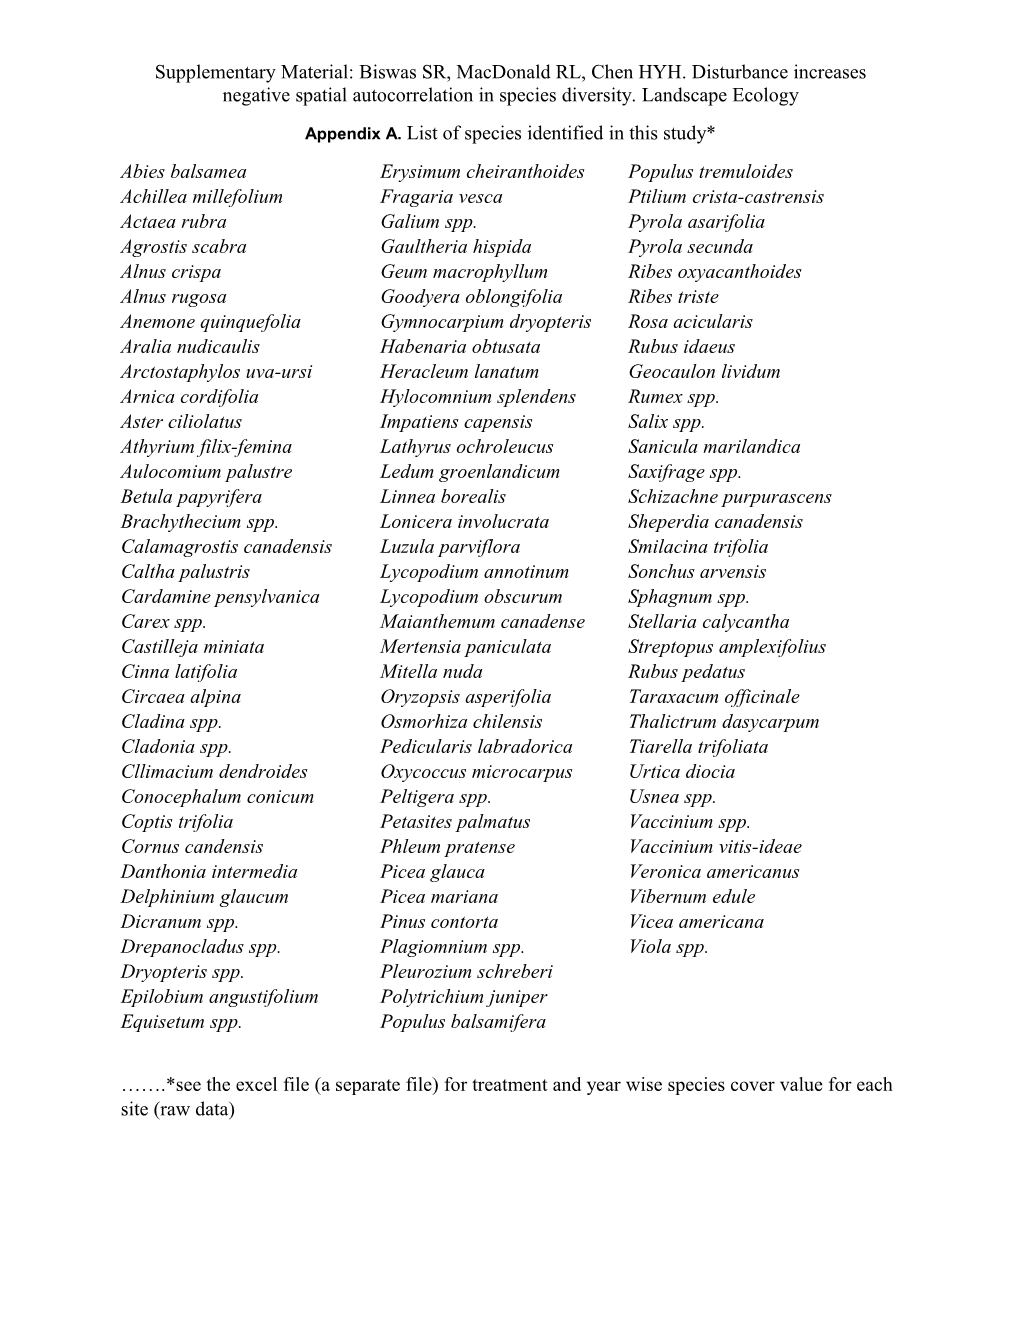 Appendix A.List of Species Identified in This Study*